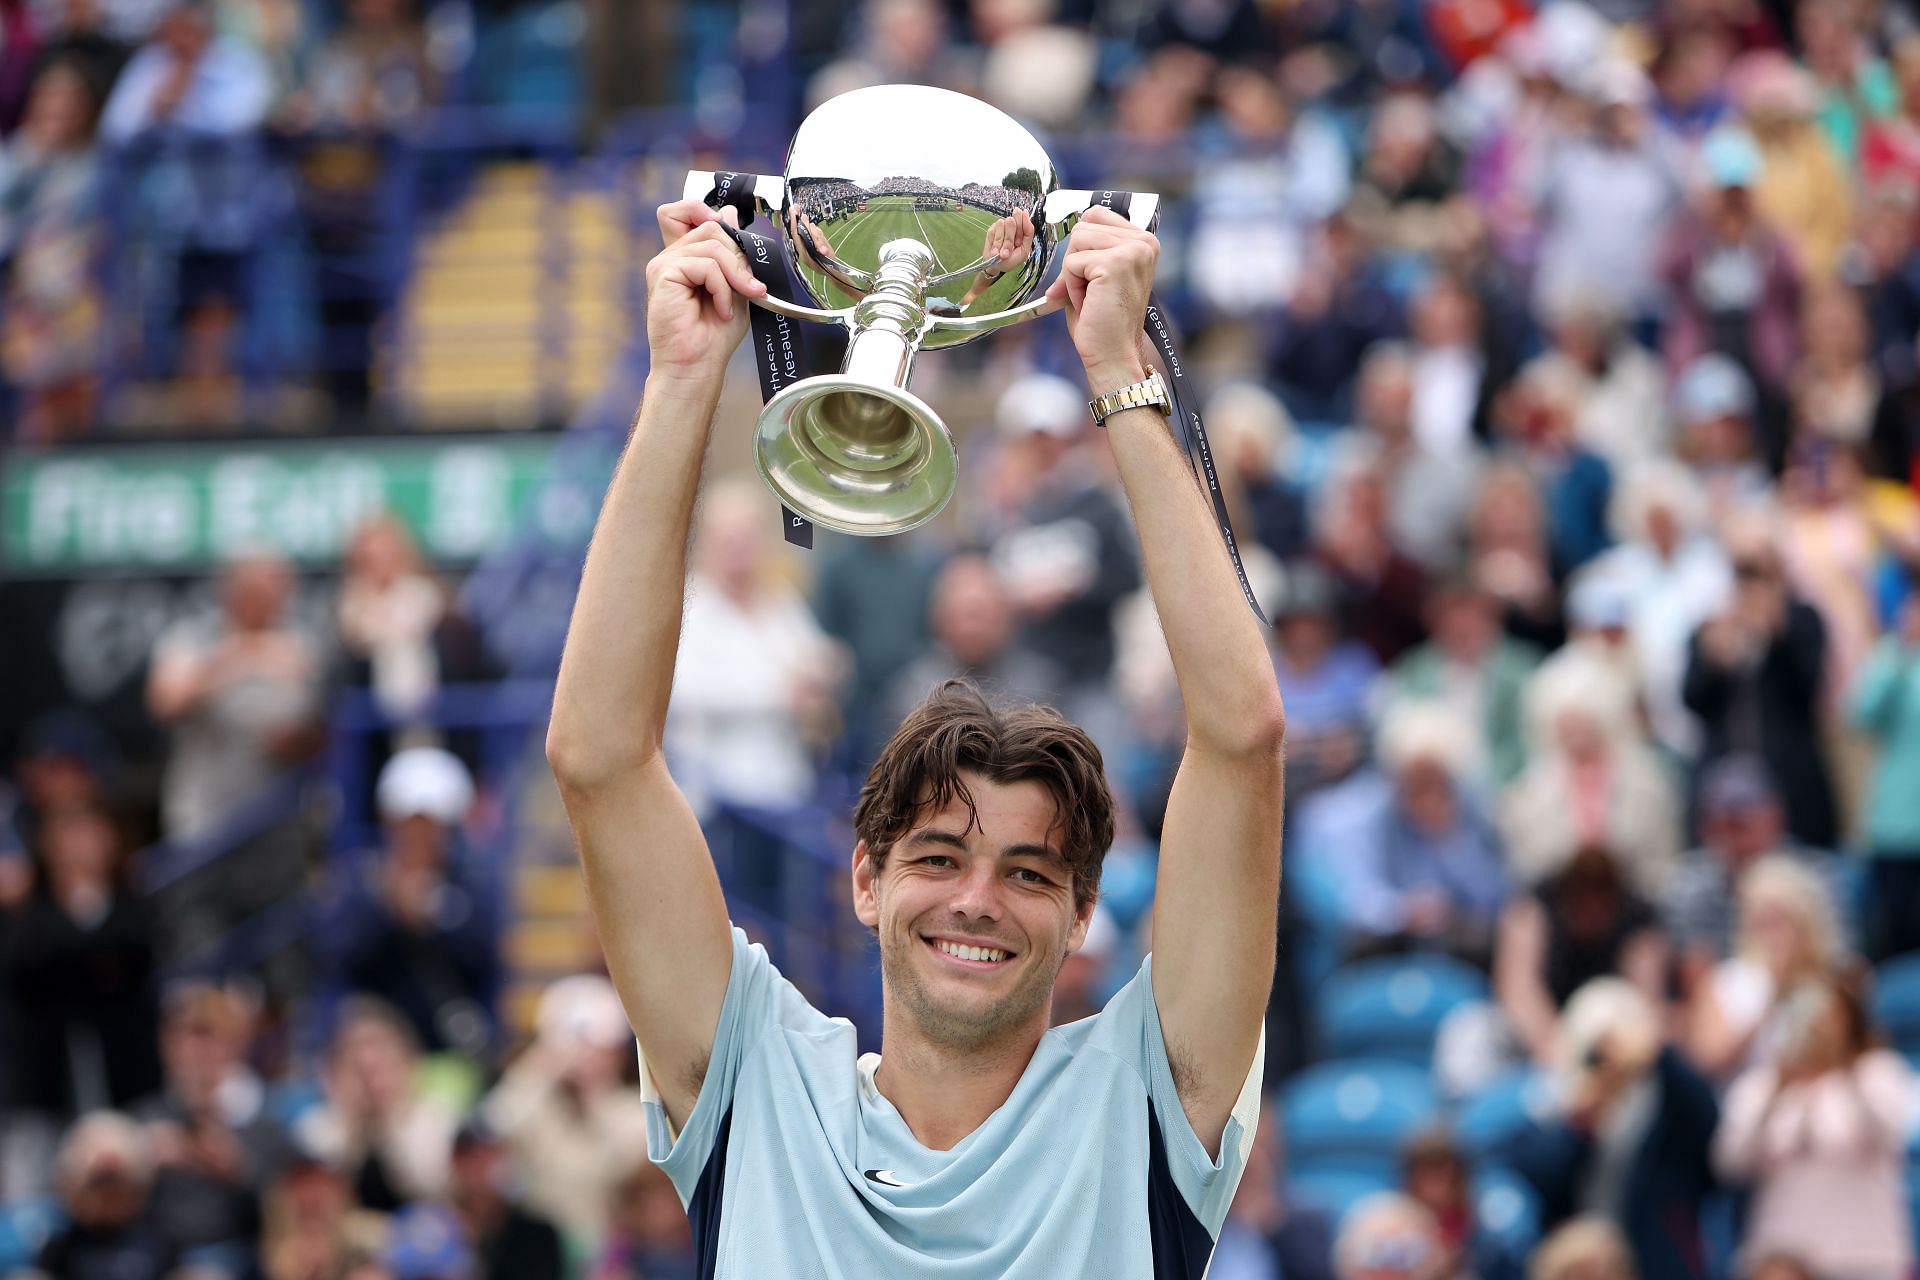 Taylor Fritz at the 2022 Rothesay International Eastbourne.